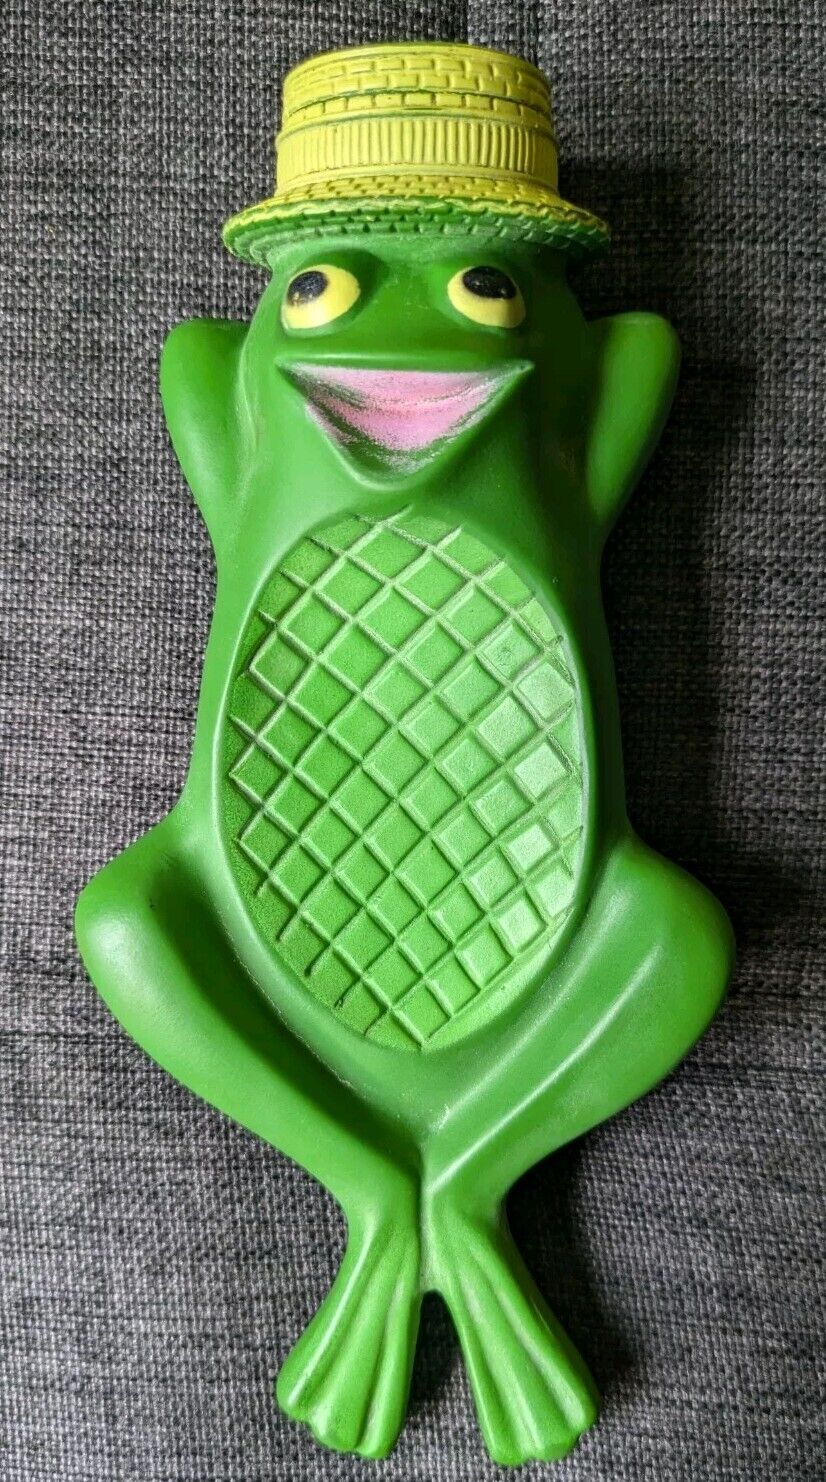 1960's Vintage Avon Freddy The Frog Squeaky Floating SoapDish Squeaker MCM Weird